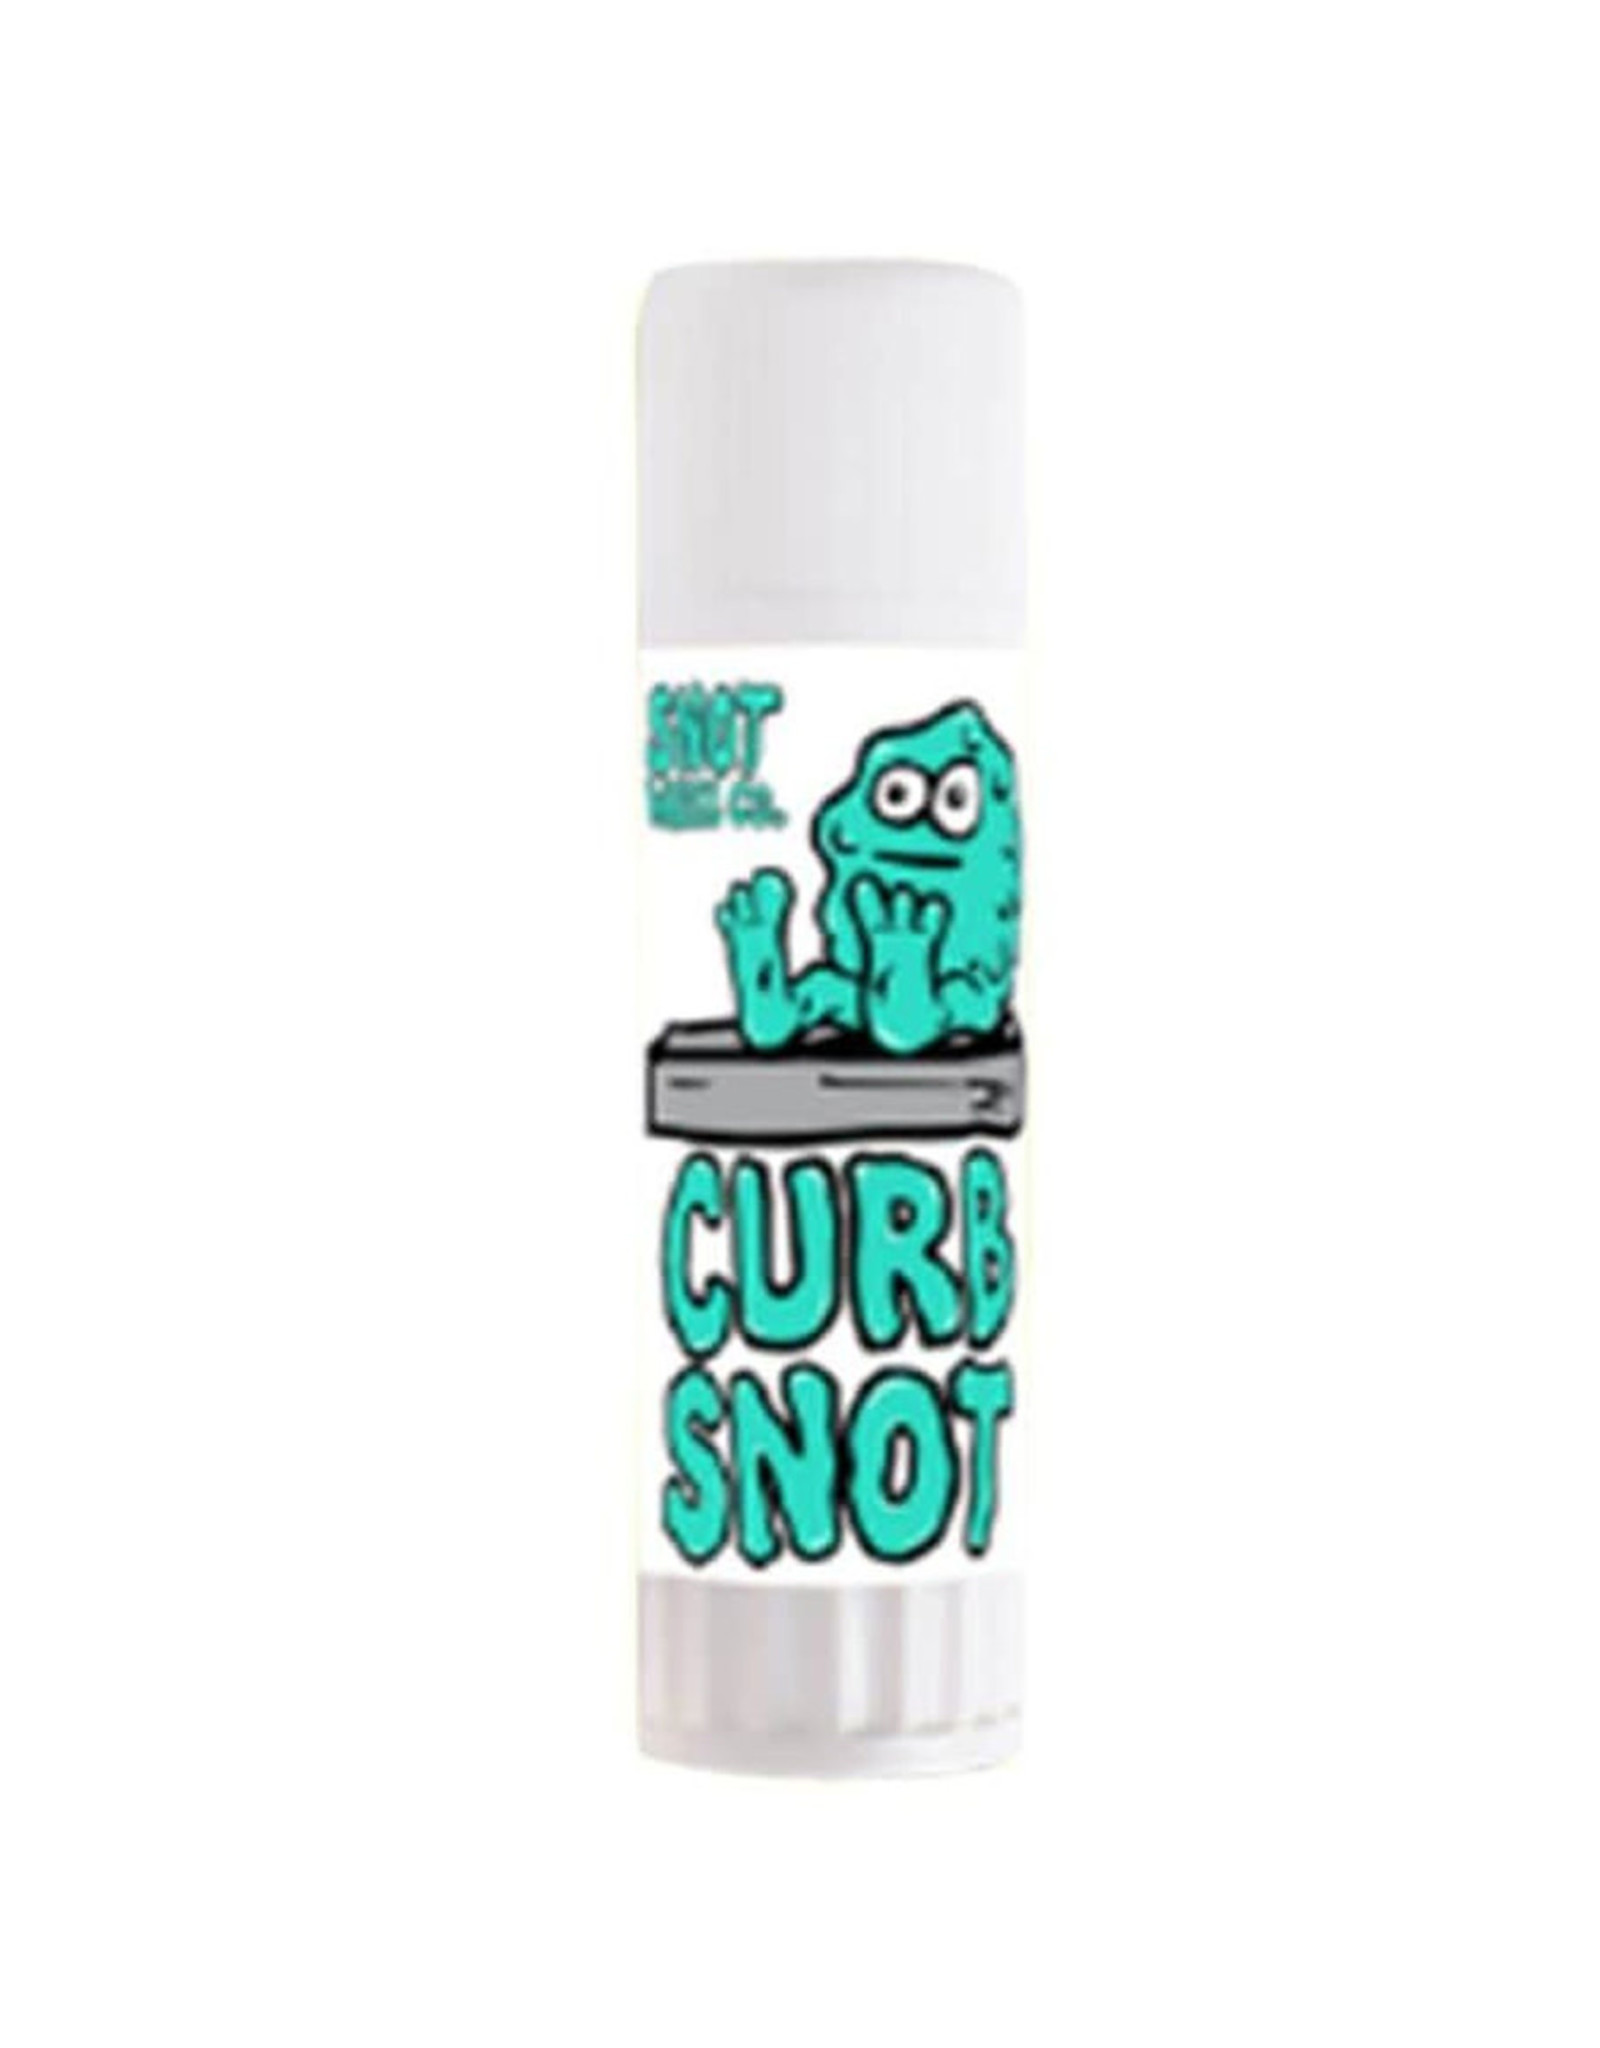 Snot Snot Wax Curb Balm (Pineapple Scent)